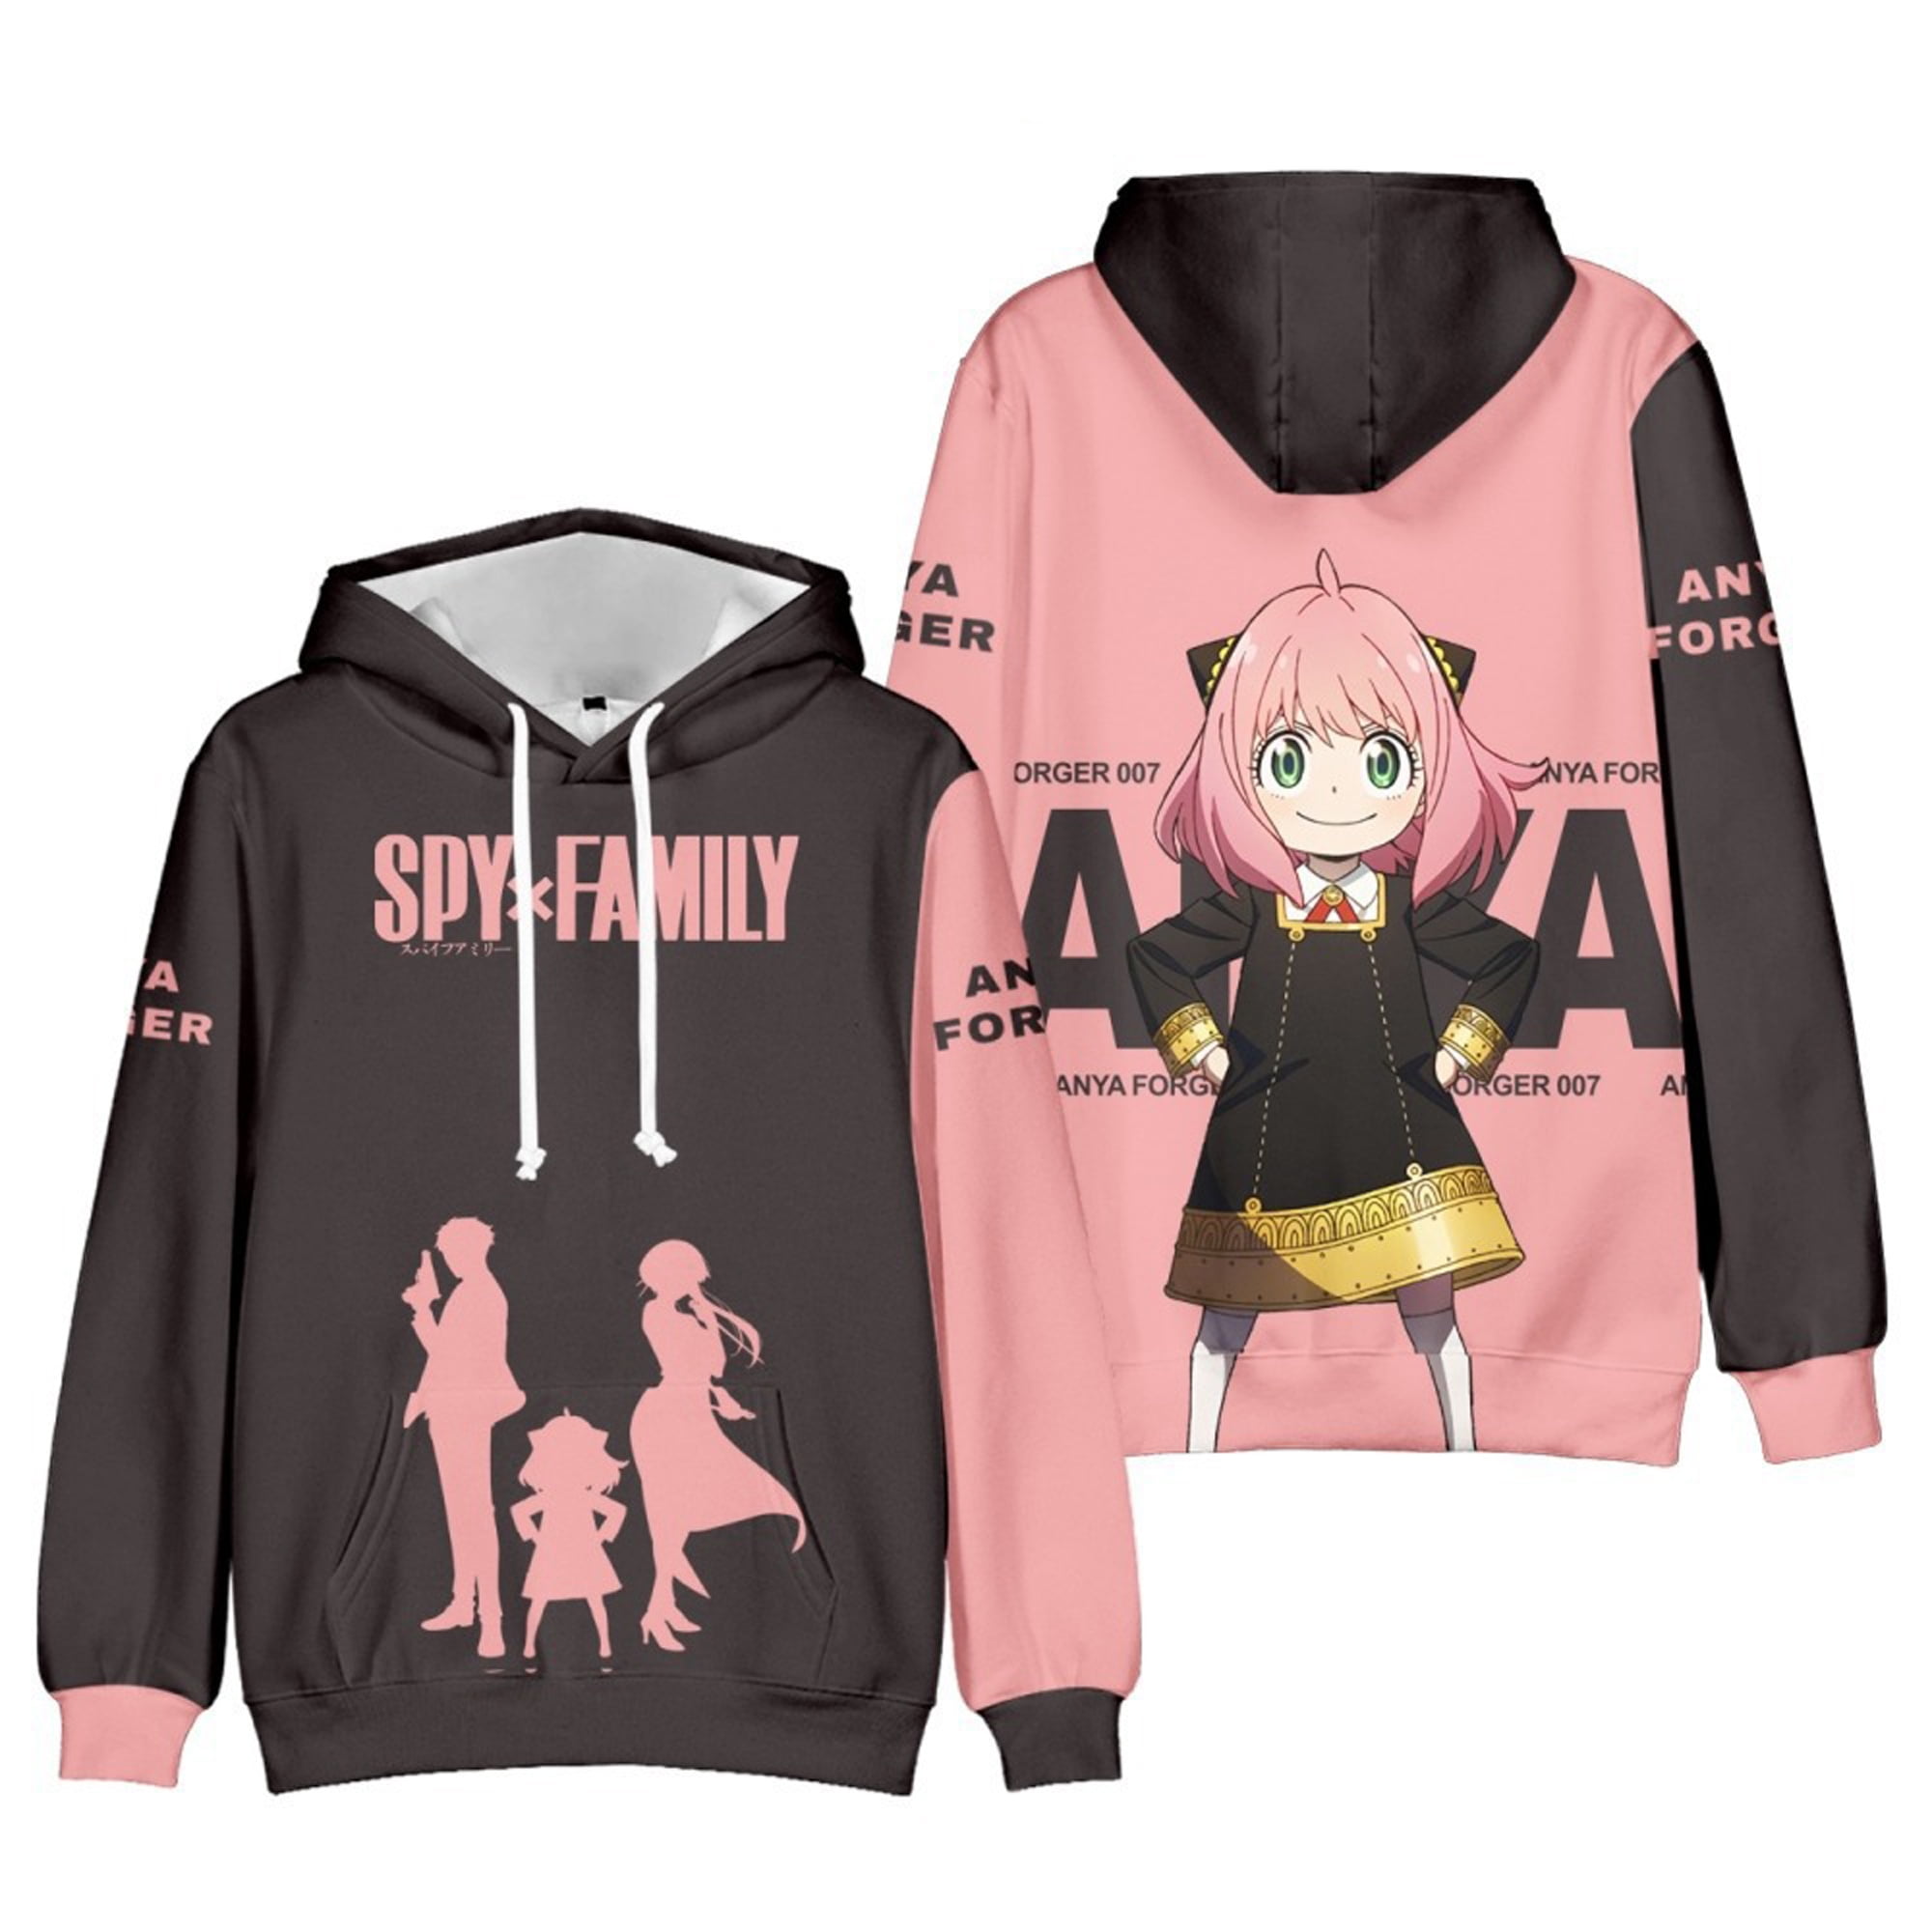 Details 89+ anime couple hoodies - in.cdgdbentre